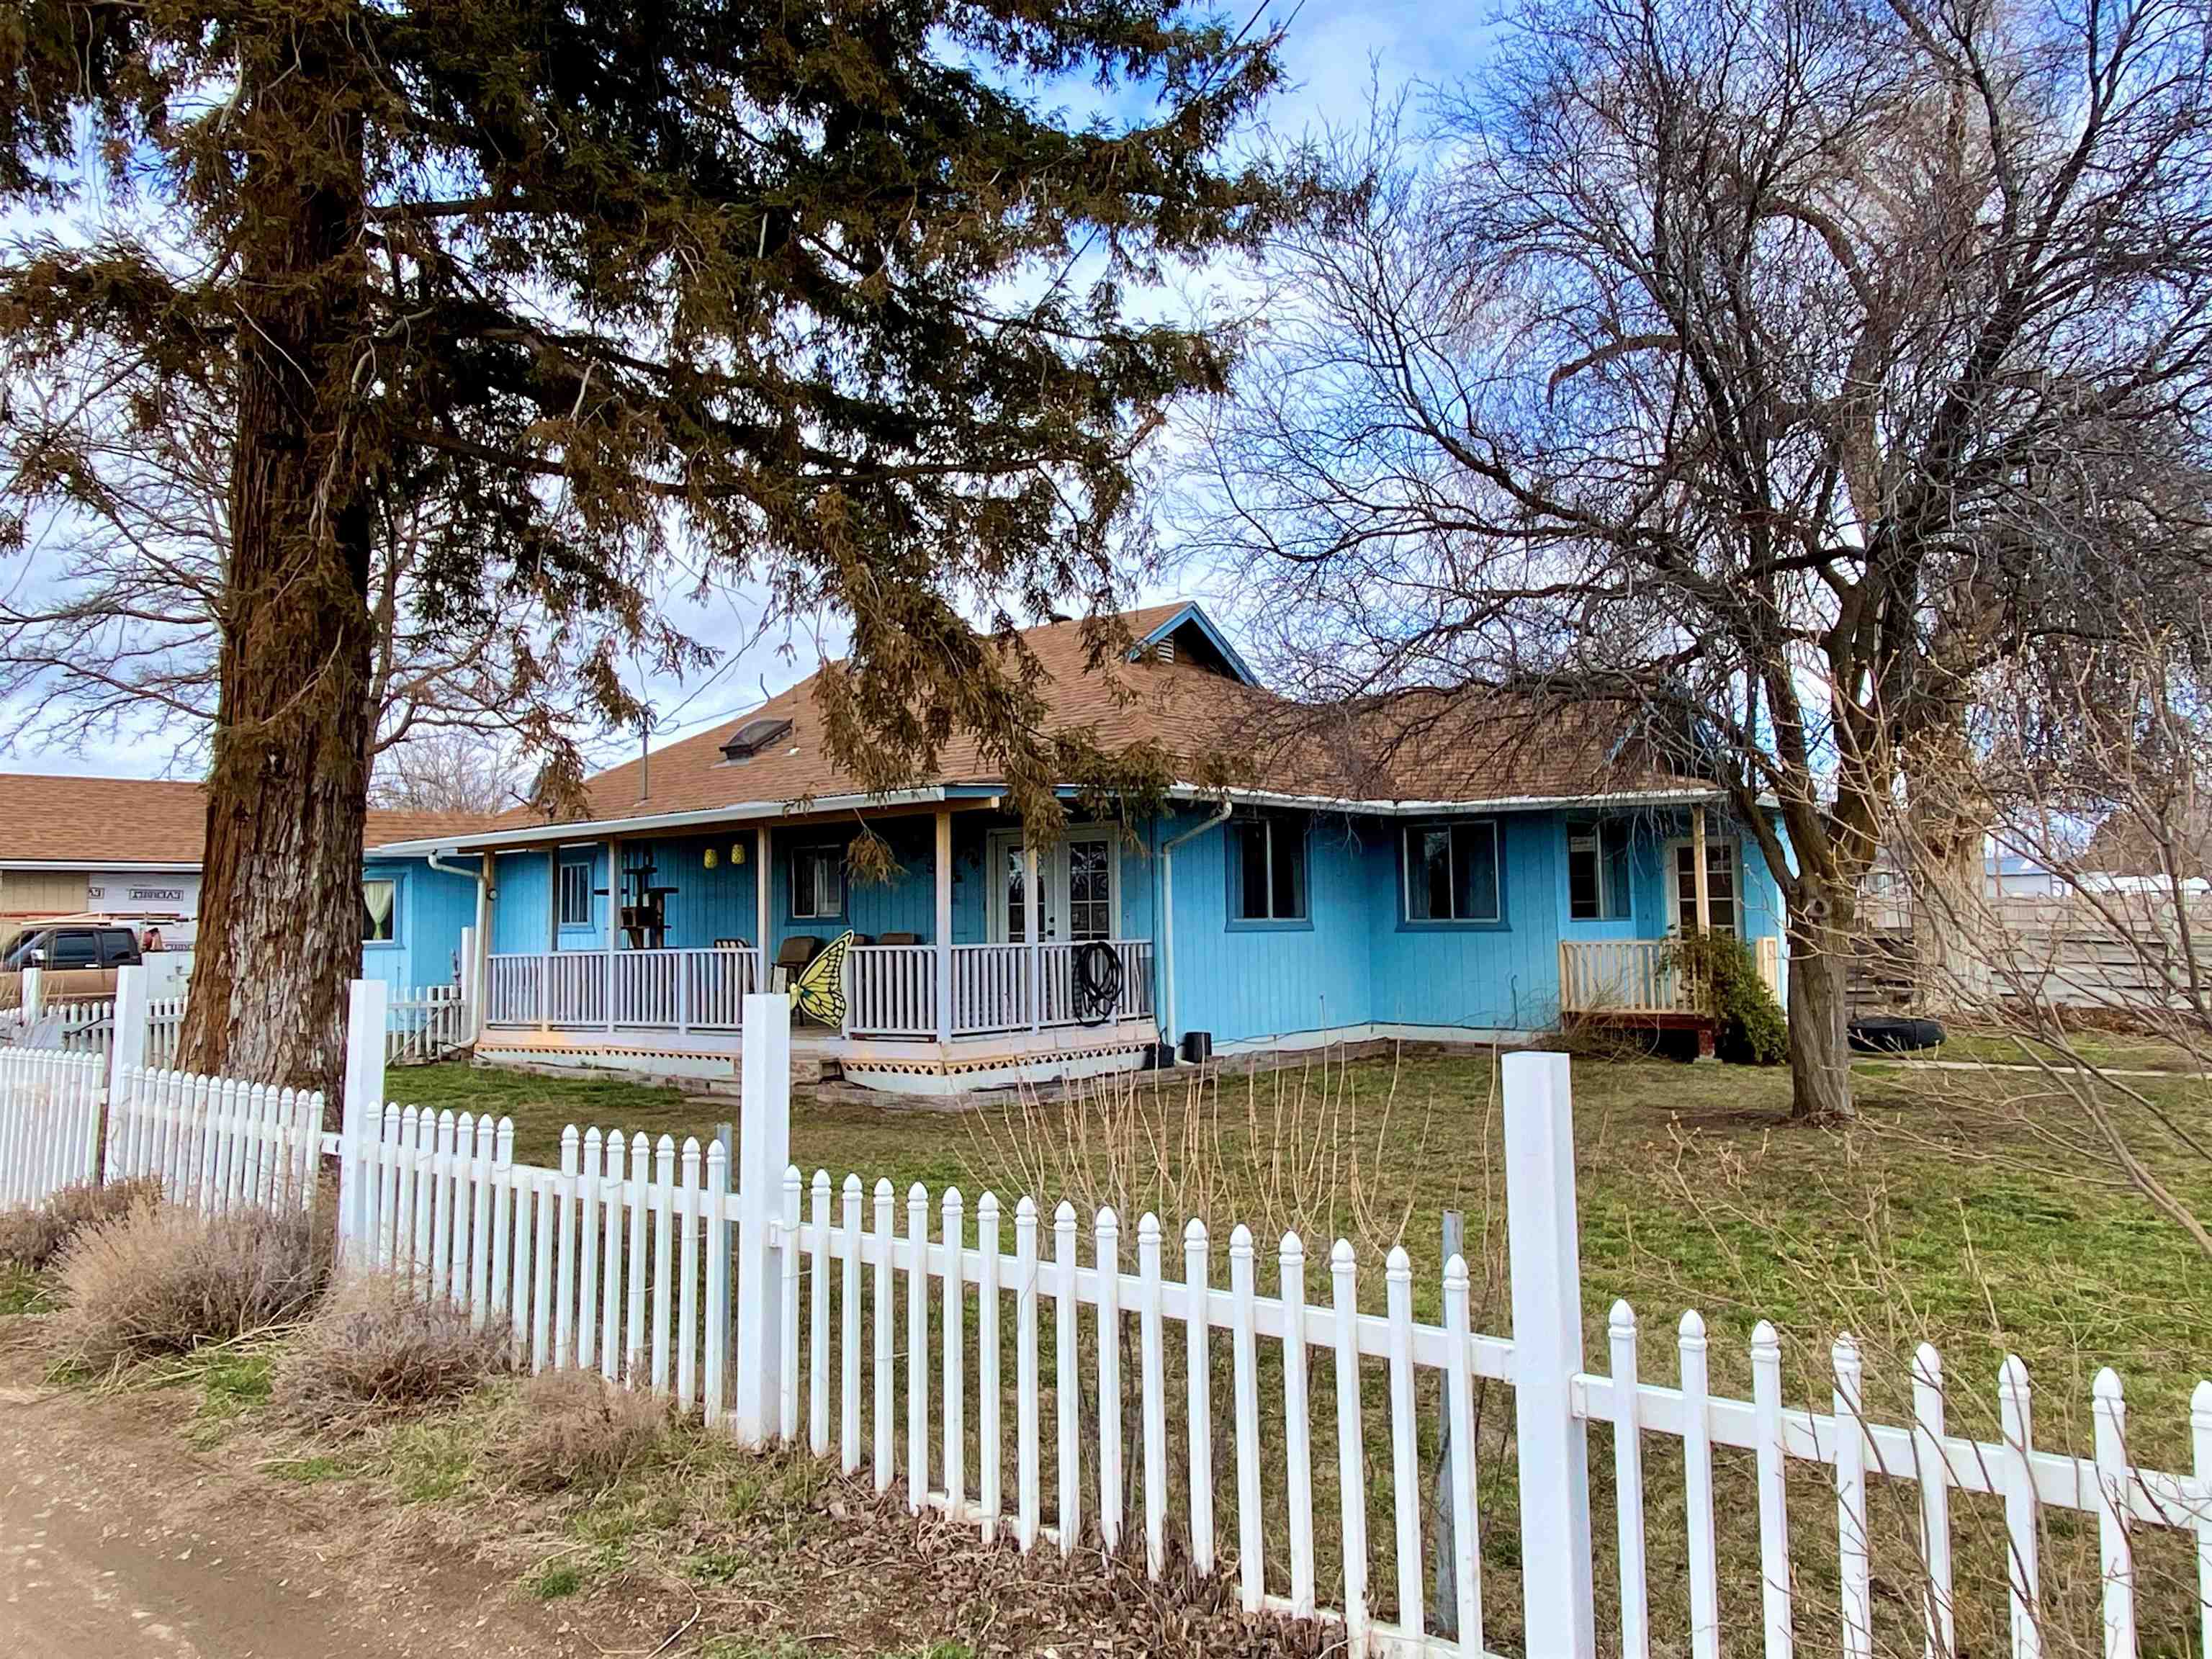 Farmhouse Charm in Grenada, CA!  Enjoy amazing Mt Shasta views from your covered porch & acreage at this renovated farmhouse! Approx 2000+ sq footage with recent improvements in 2017 including a New Roof, laminate floors throughout much of home w/ tiled bathrooms, heated tile floor & jetted tub off primary bedroom- all while keeping the charm of country life.  A detached garage has been enclosed for a workshop/storage but could easily be converted back with a highly DESIRABLE LOCATION within Grenada School district.  Plenty of room for animals & gardening with a good producing well (New Pump 2022), RV HOOK-UP and services available from Grenada City if desired!   If you're looking for a comforting space & a new start- THIS HOME HAS IT ALL!  NOTE: The accuracy of the information provided is deemed reliable but is not guaranteed, is subject to change and should be independently verified.